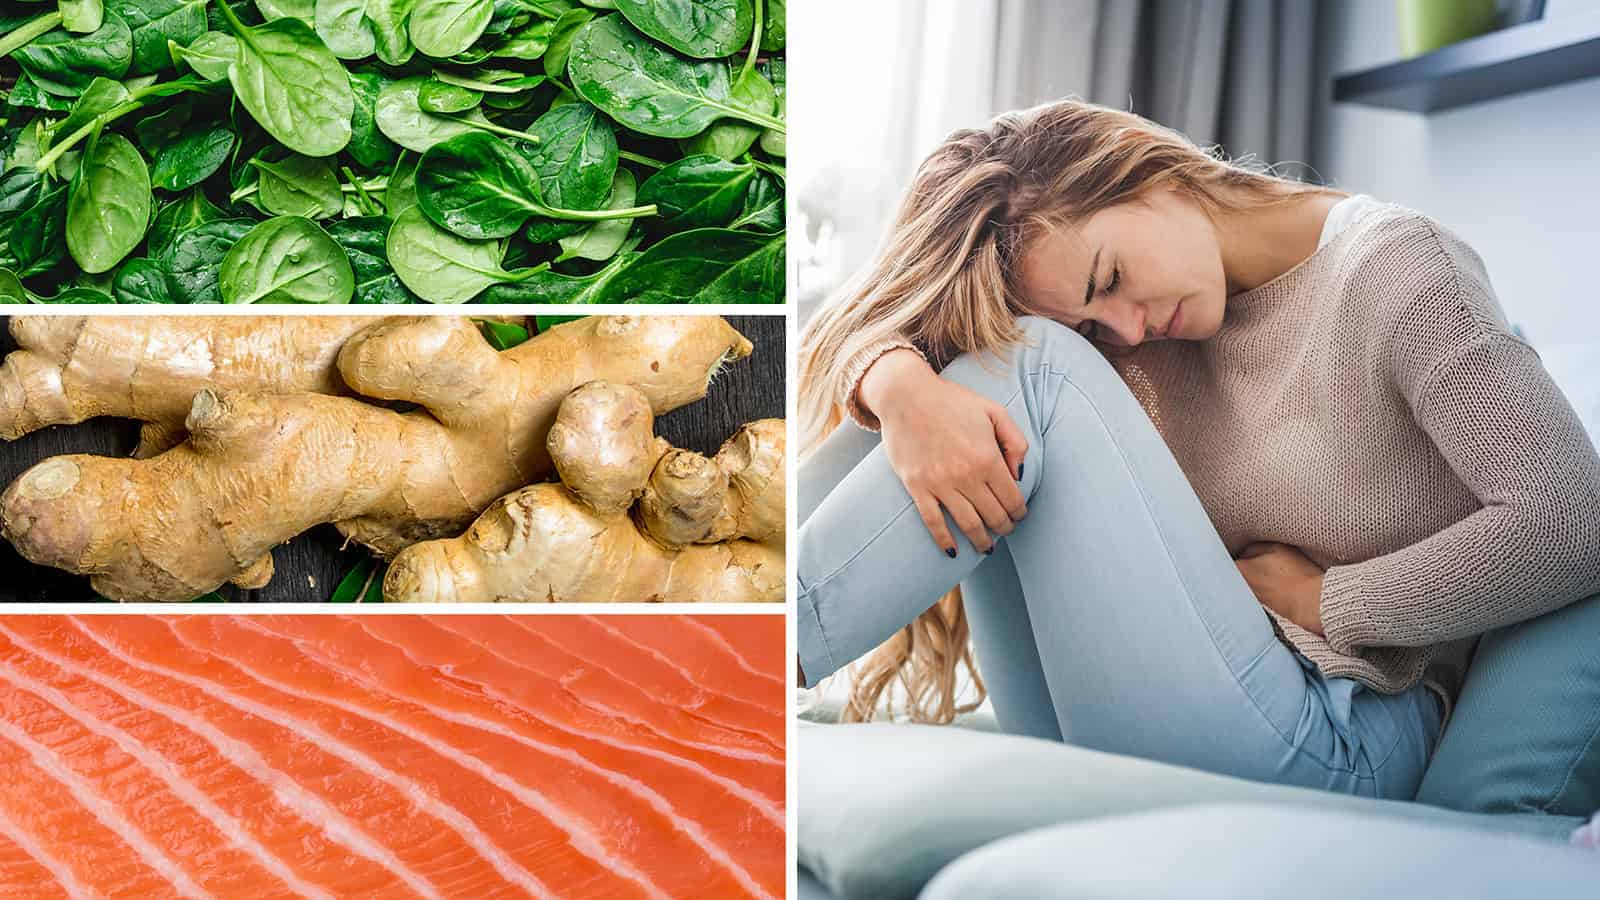 12 Foods That Help Women’s Health During A Period